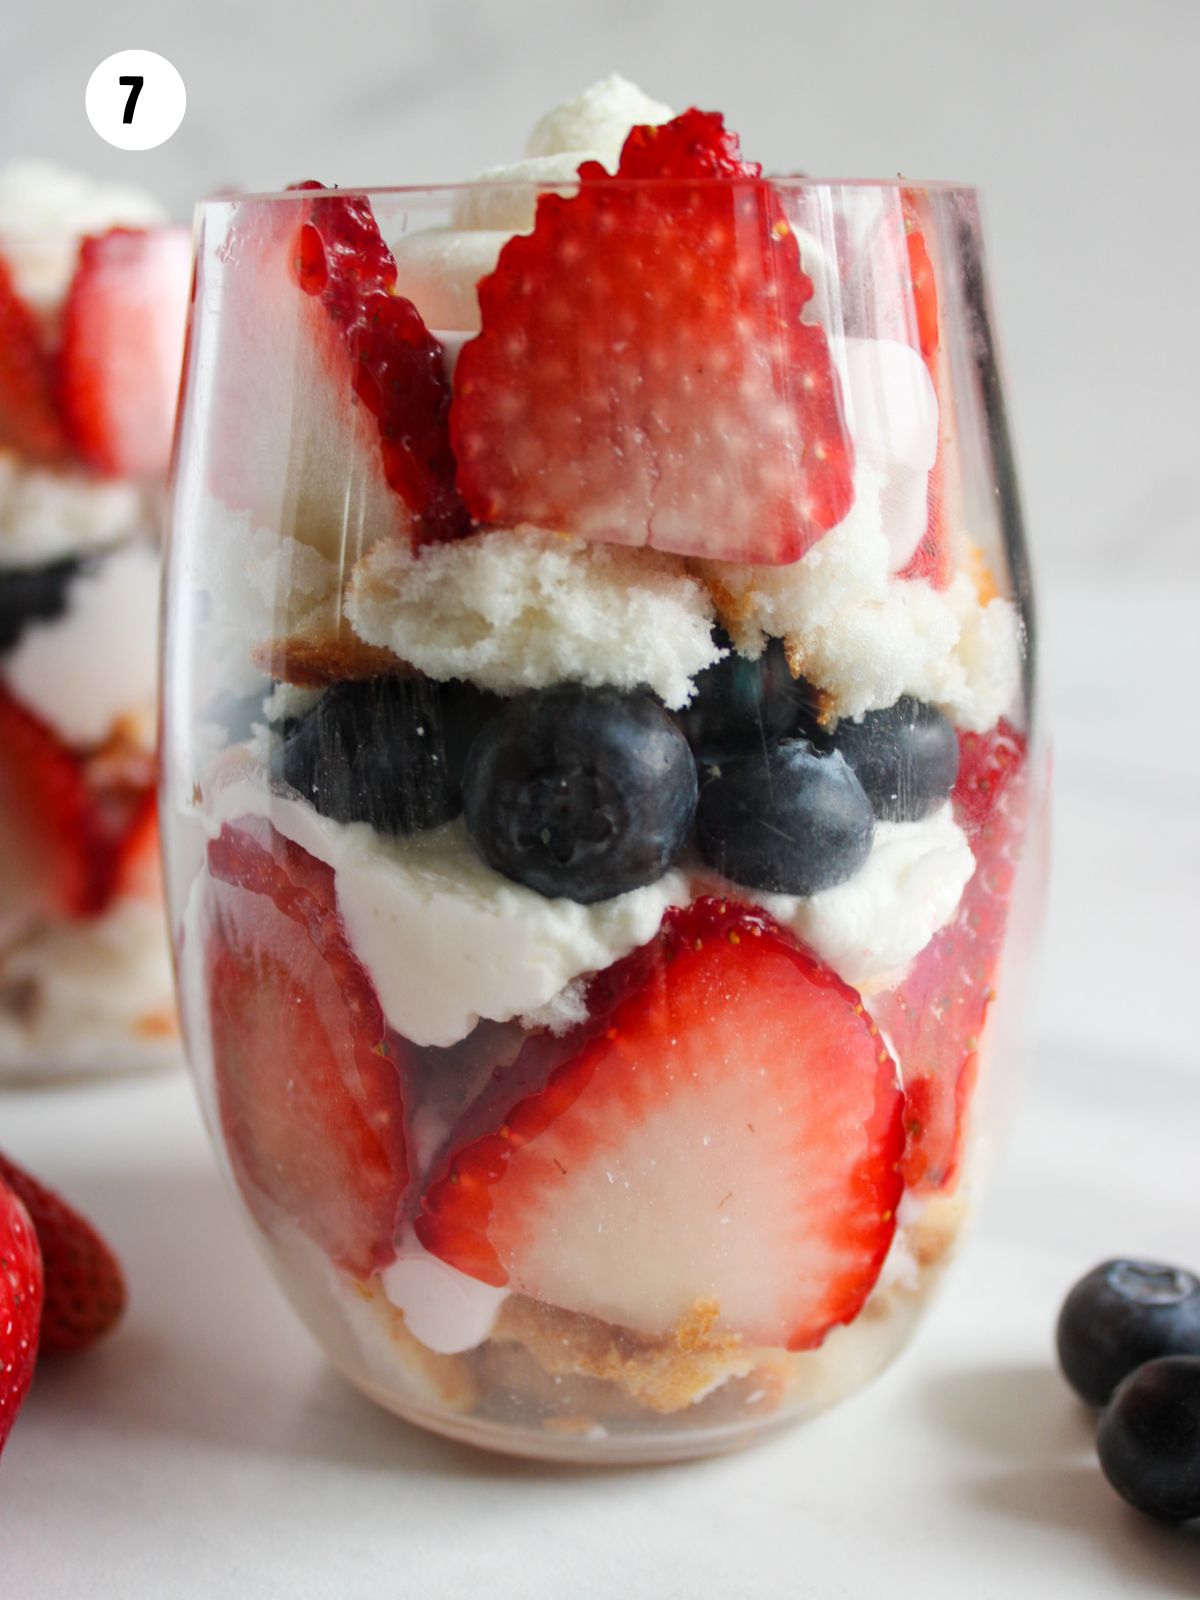 glass filled with angel food cake, berries and whipped cream.